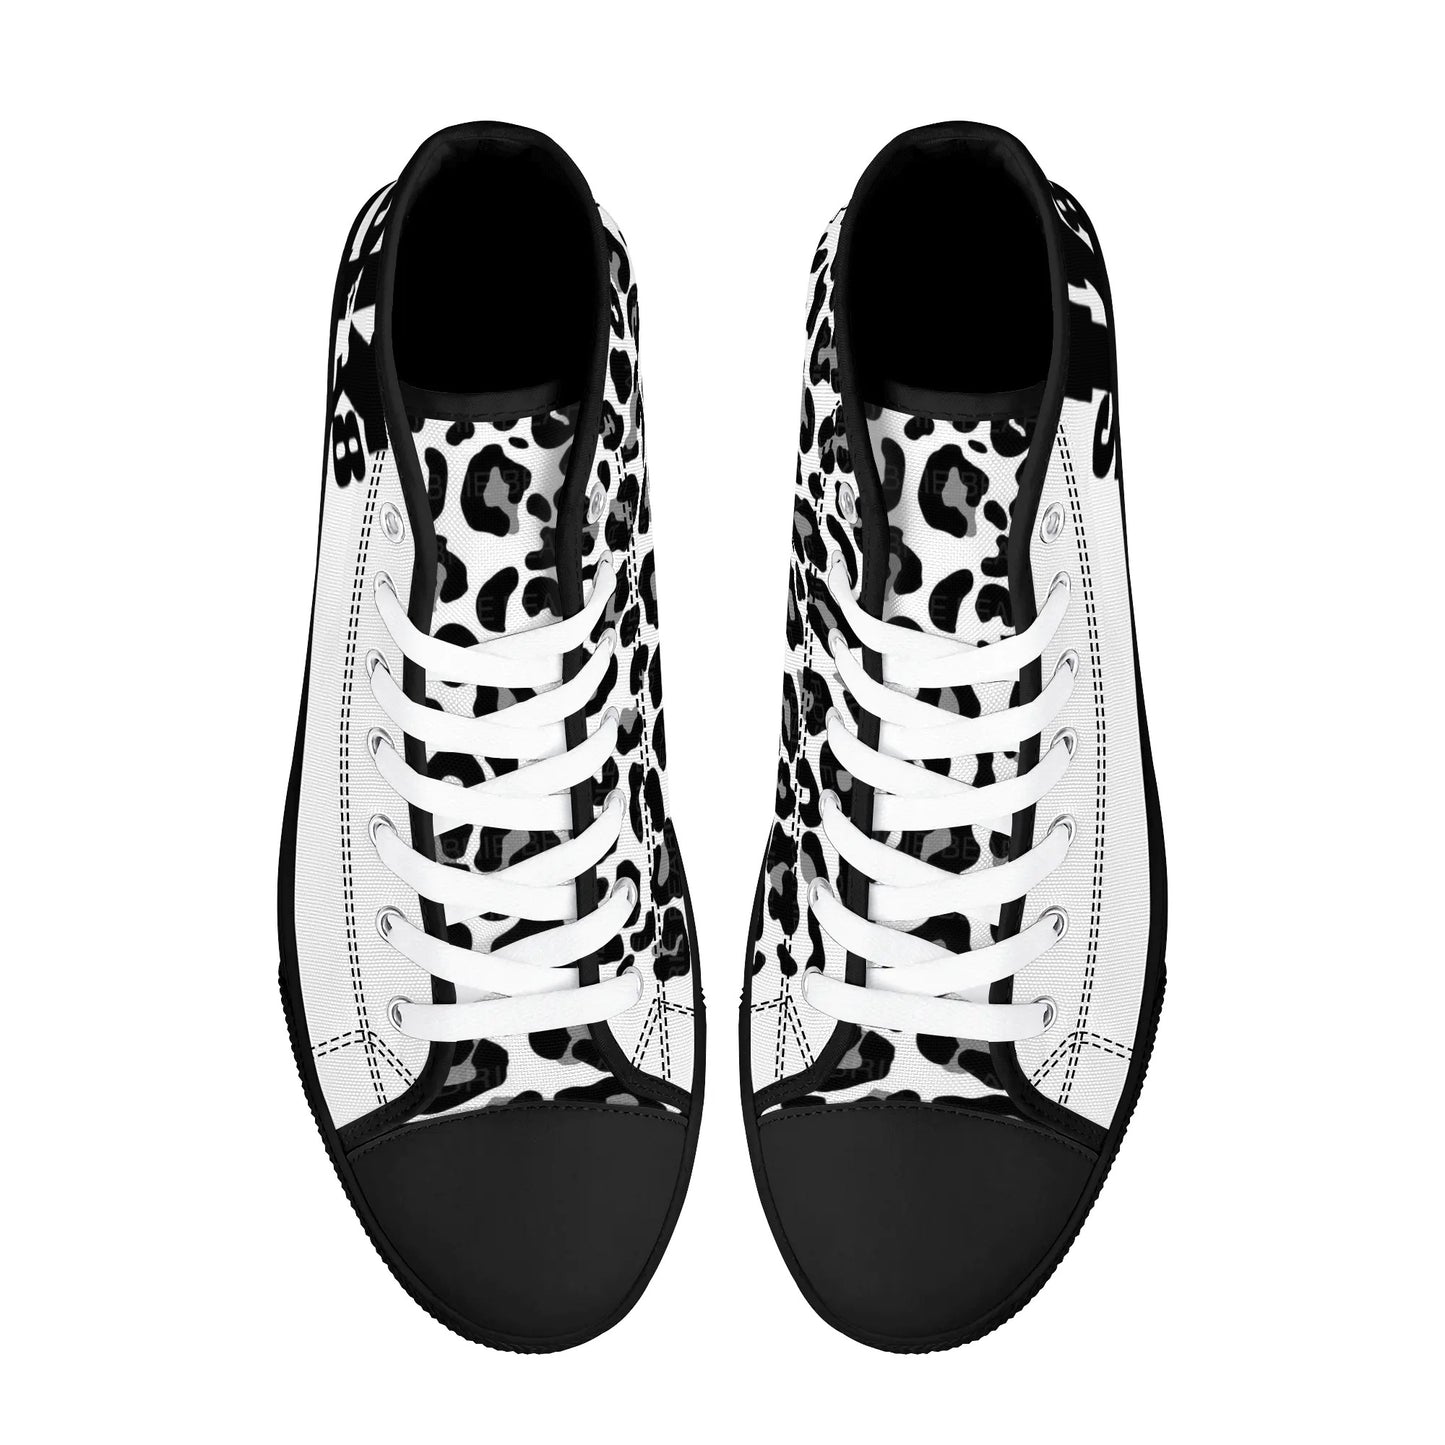 Womens Sk8 Freestyle “Leopard” High Top Canvas Shoes